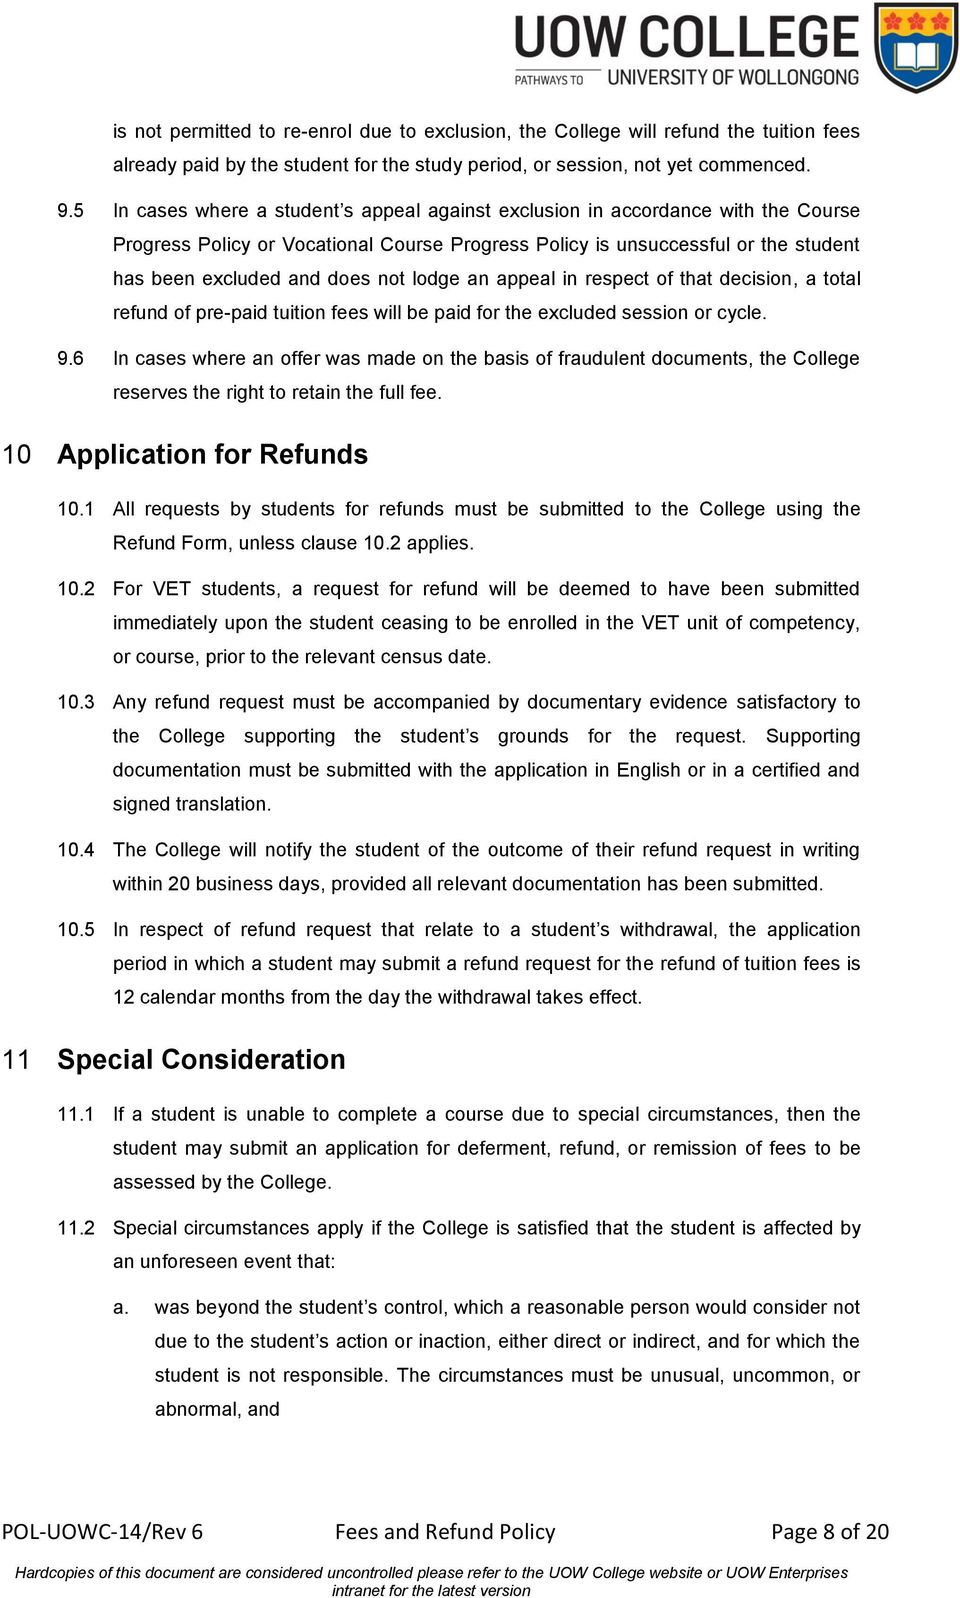 lodge an appeal in respect of that decision, a total refund of pre-paid tuition fees will be paid for the excluded session or cycle. 9.